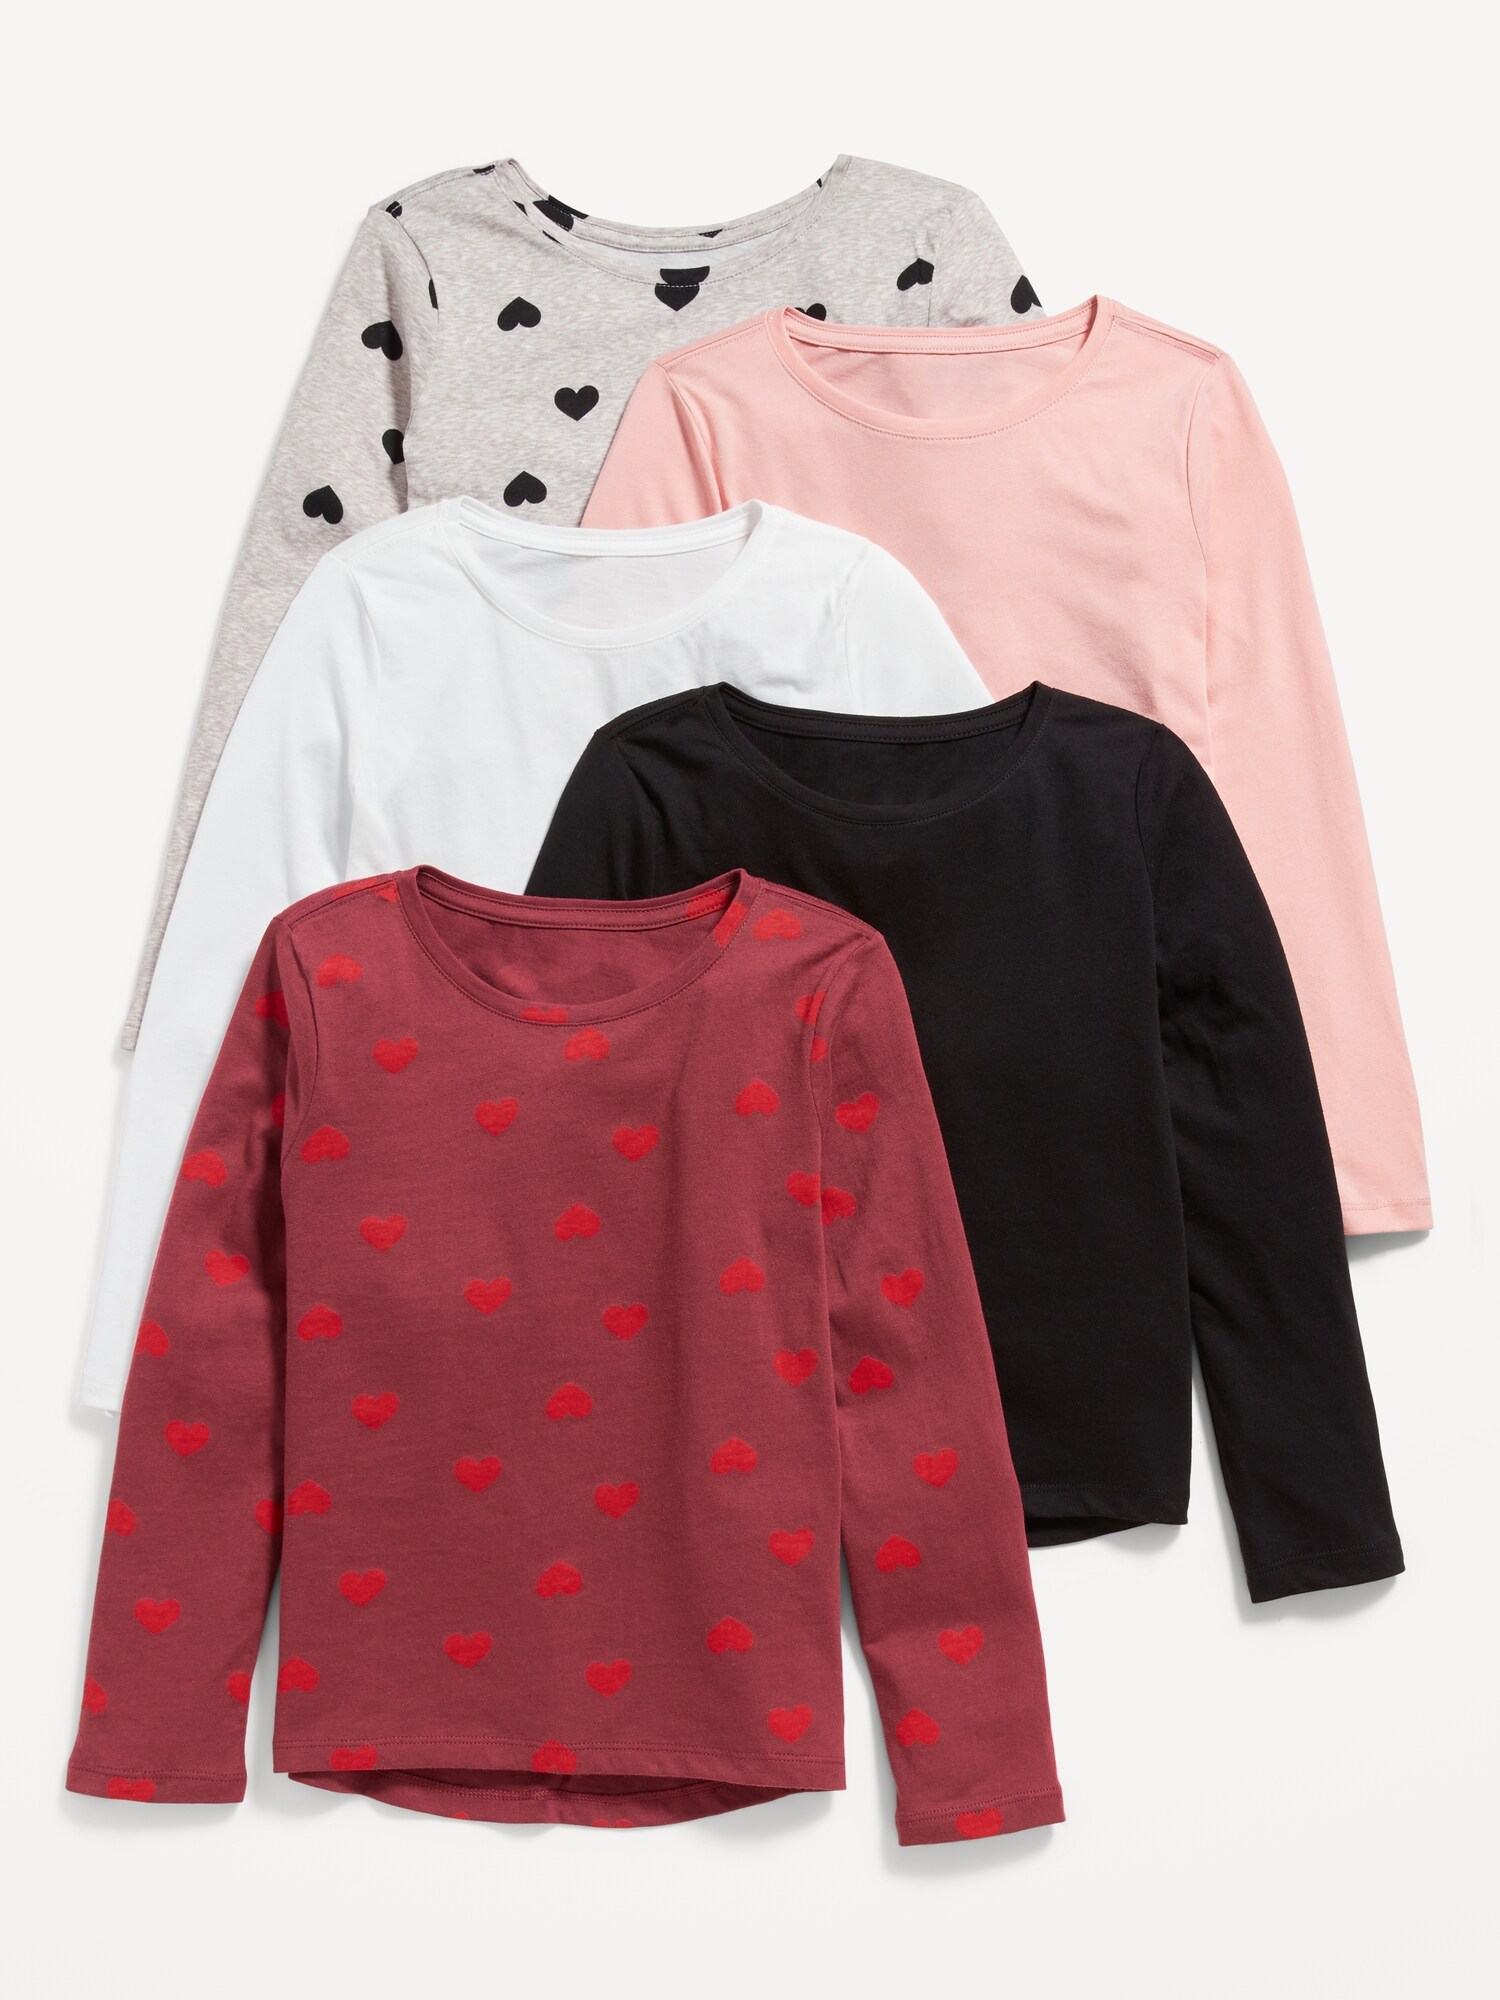 Old Navy Softest Long-Sleeve T-Shirt 5-Pack for Girls red. 1